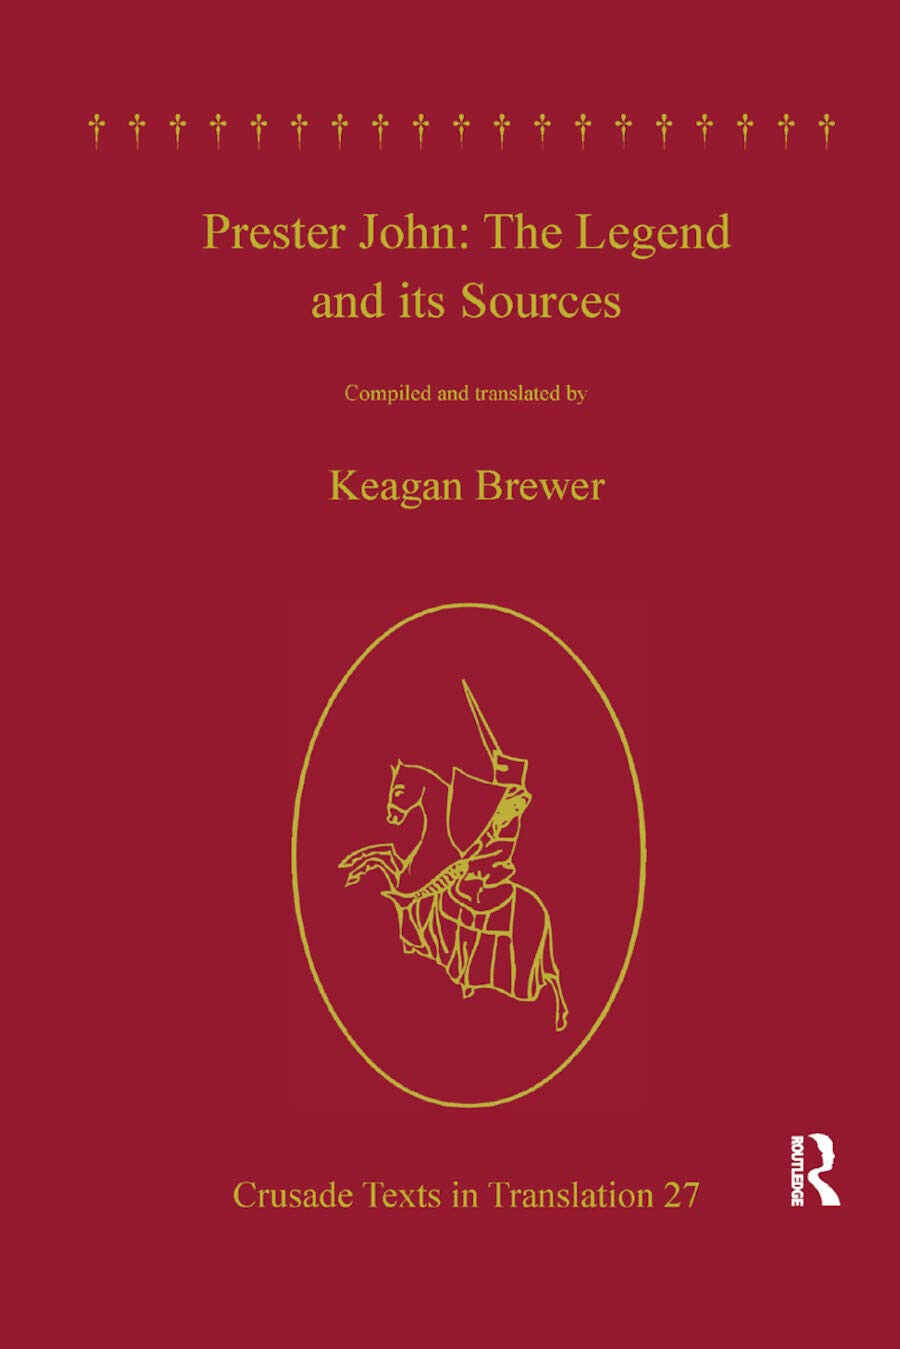 Prester John: The Legend And Its Sources - Keagan Brewer - Routledge, 2019